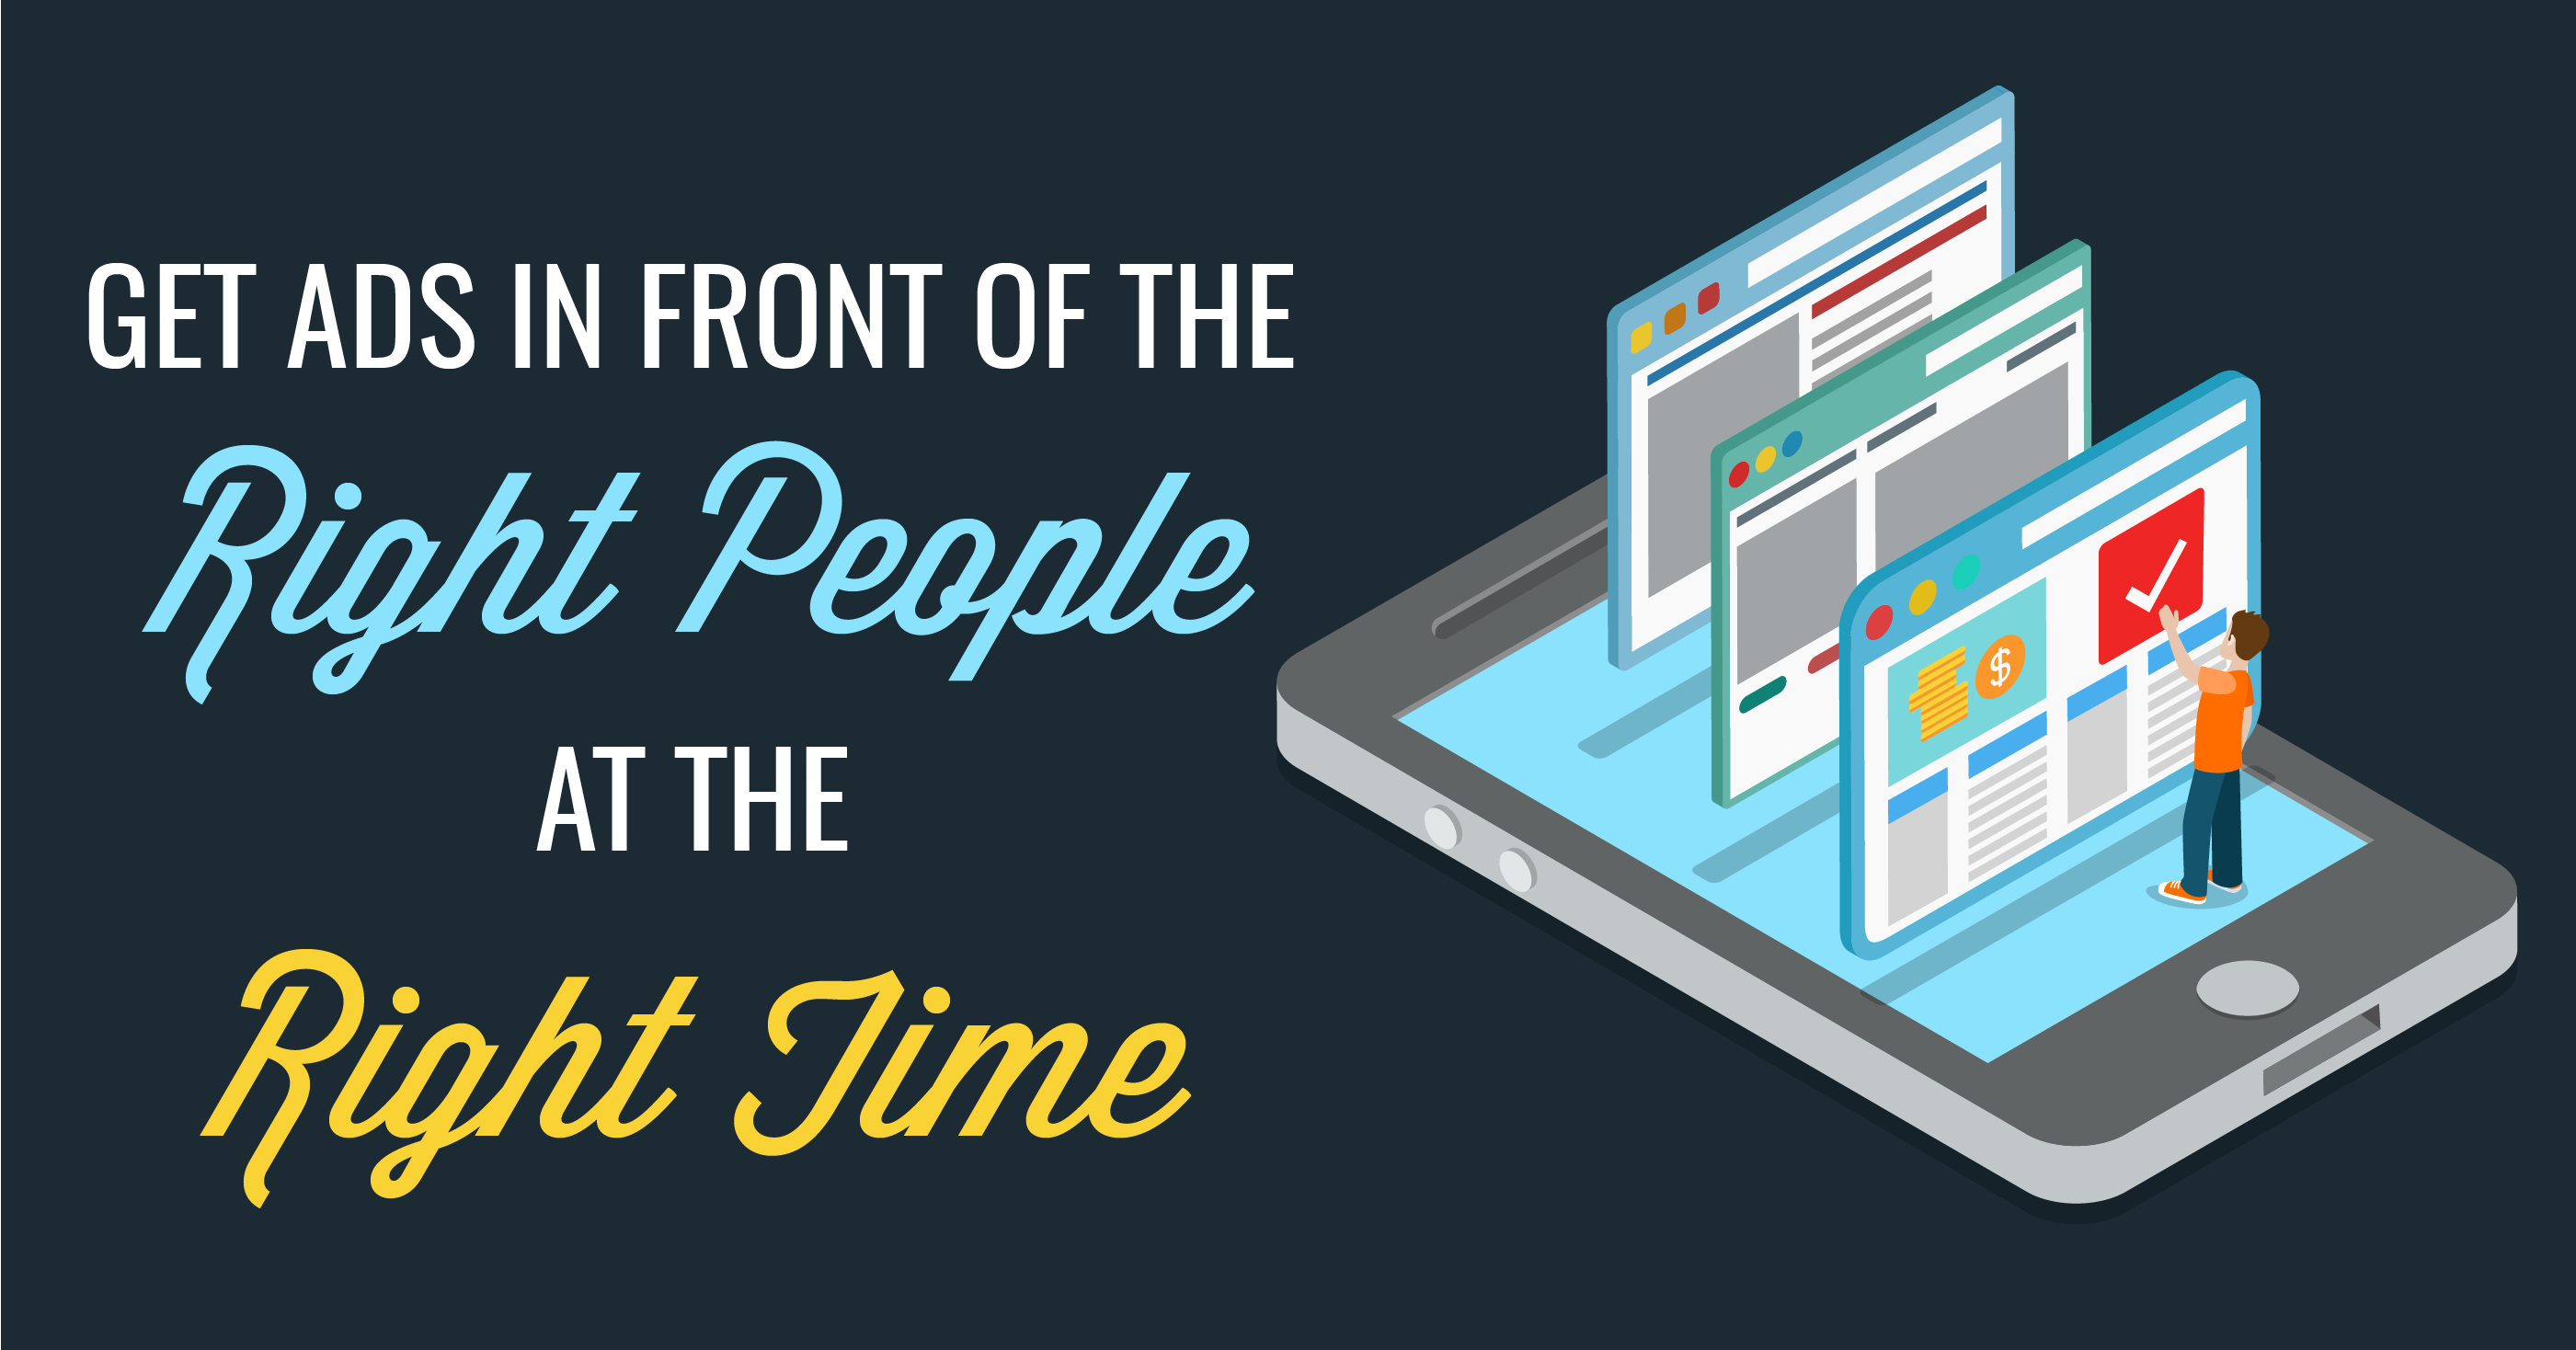 Get Ads in Front of the Right People at the Right Time